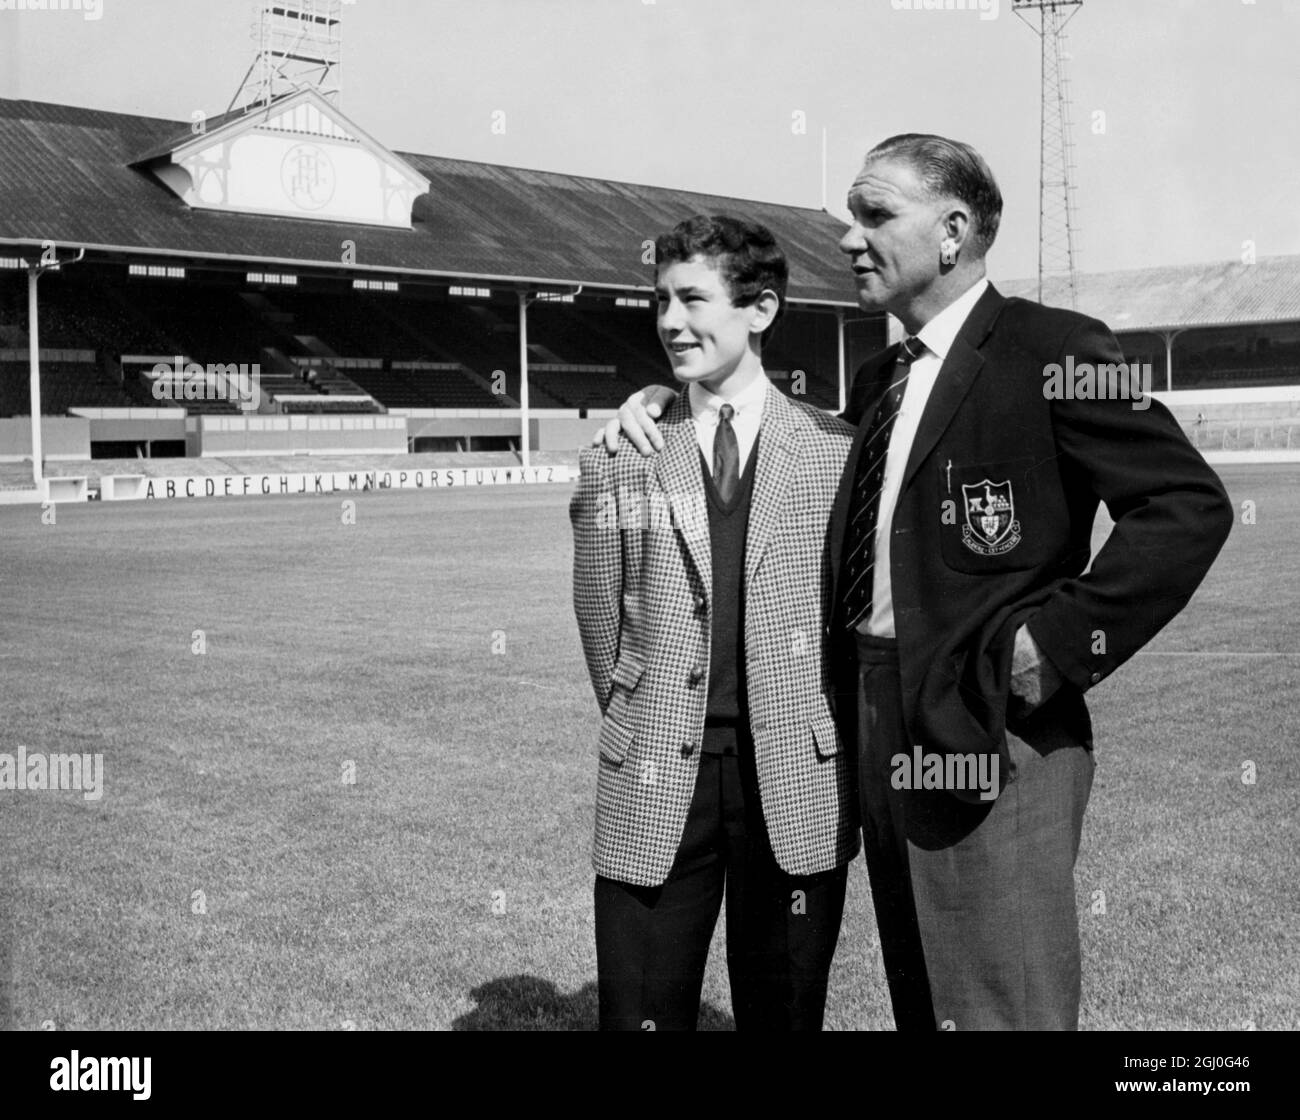 Jimmy Pearce, right, 15 year old apprentice with Tottenham manager, Bill Nicholson. At present, Jimmy earns £7 per week and could earn £100 per week, if he makes the grade. 23rd July 1963 Stock Photo